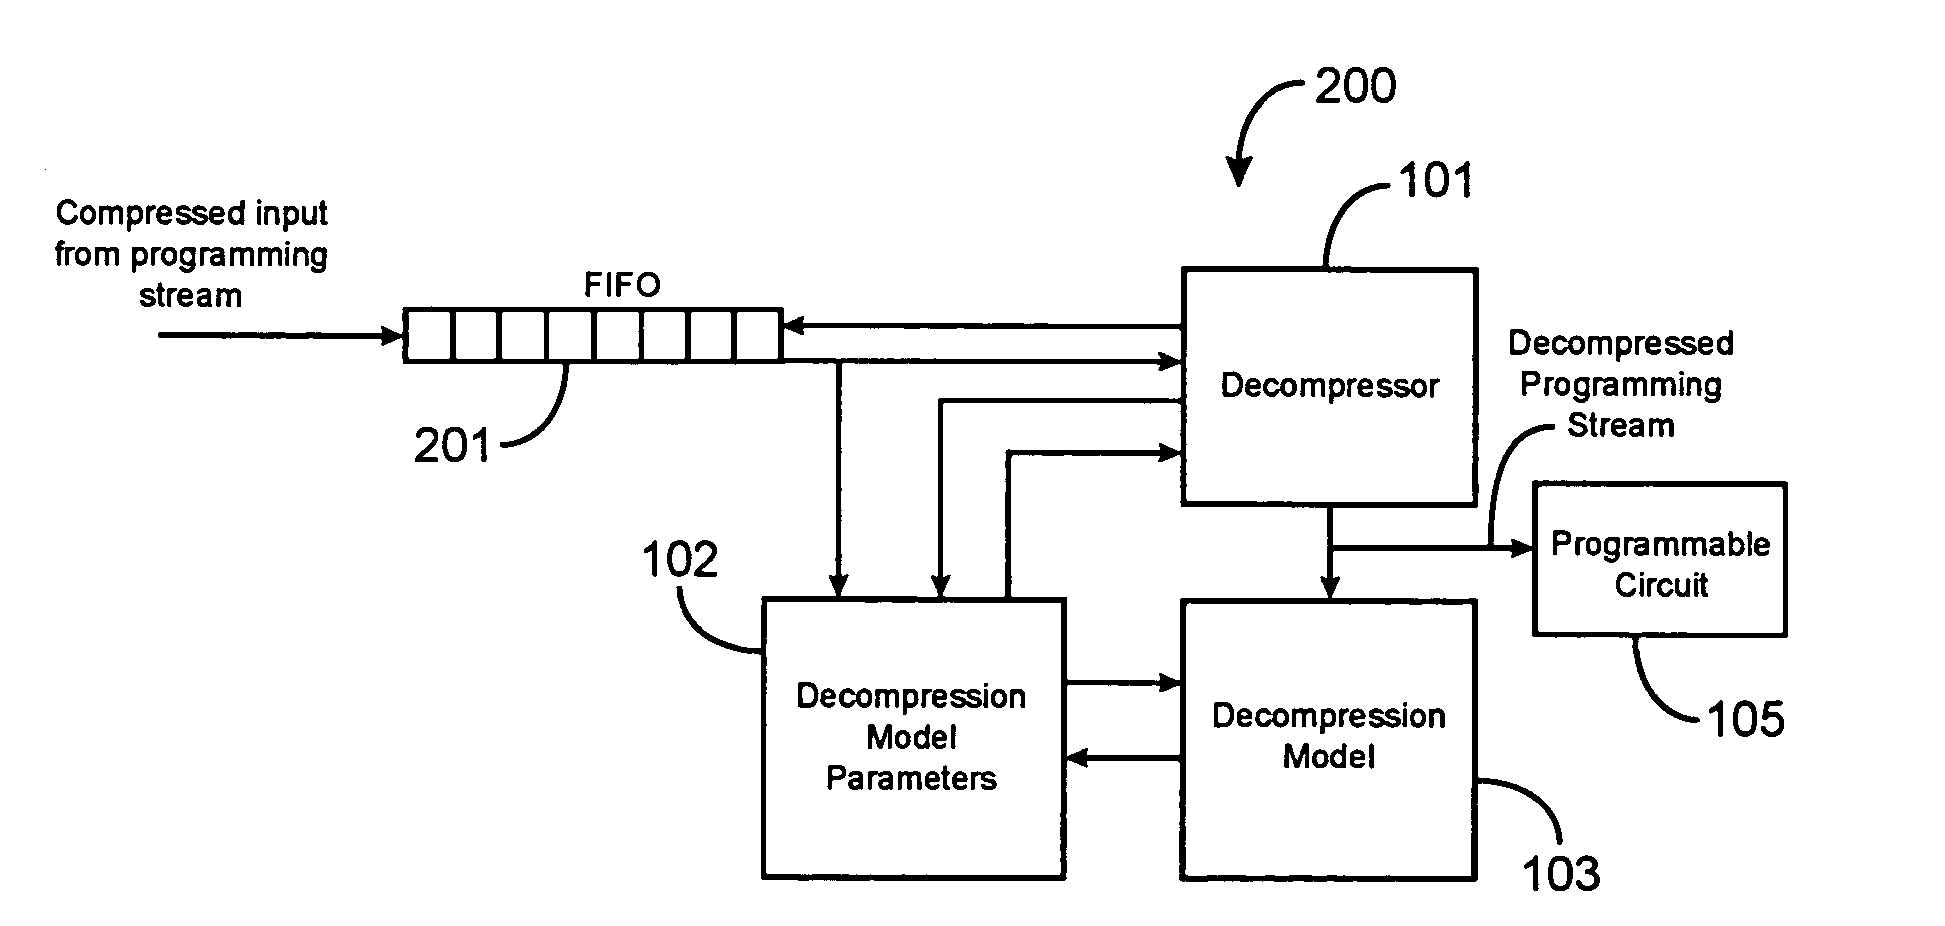 Data compression and decompression techniques for programmable circuits